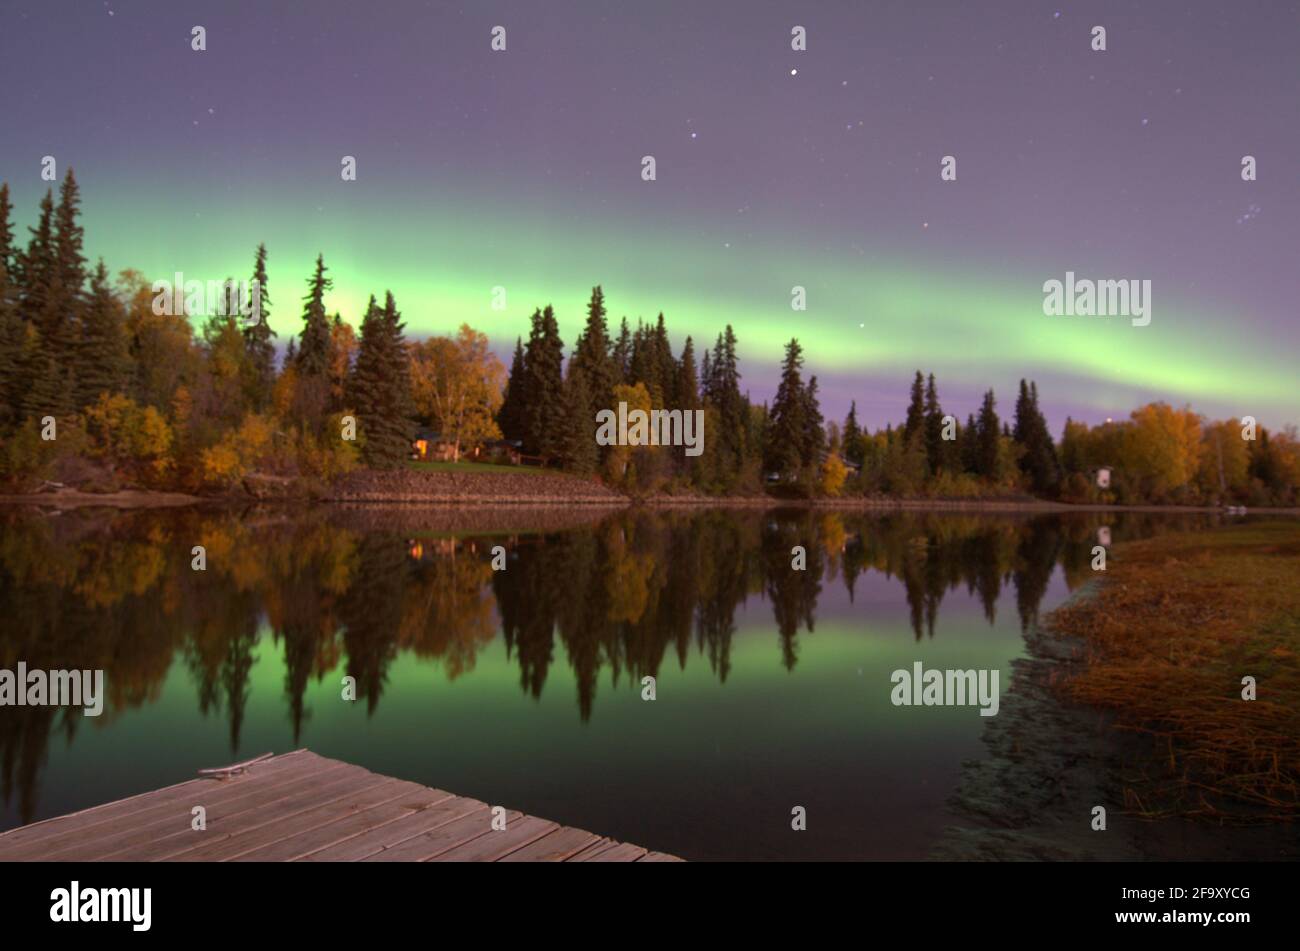 Northern Lights, Lake showing reflections on water - Alaska. Pine trees and reflections in still water of lake side. Aurora Borealis. Purples & Green Stock Photo